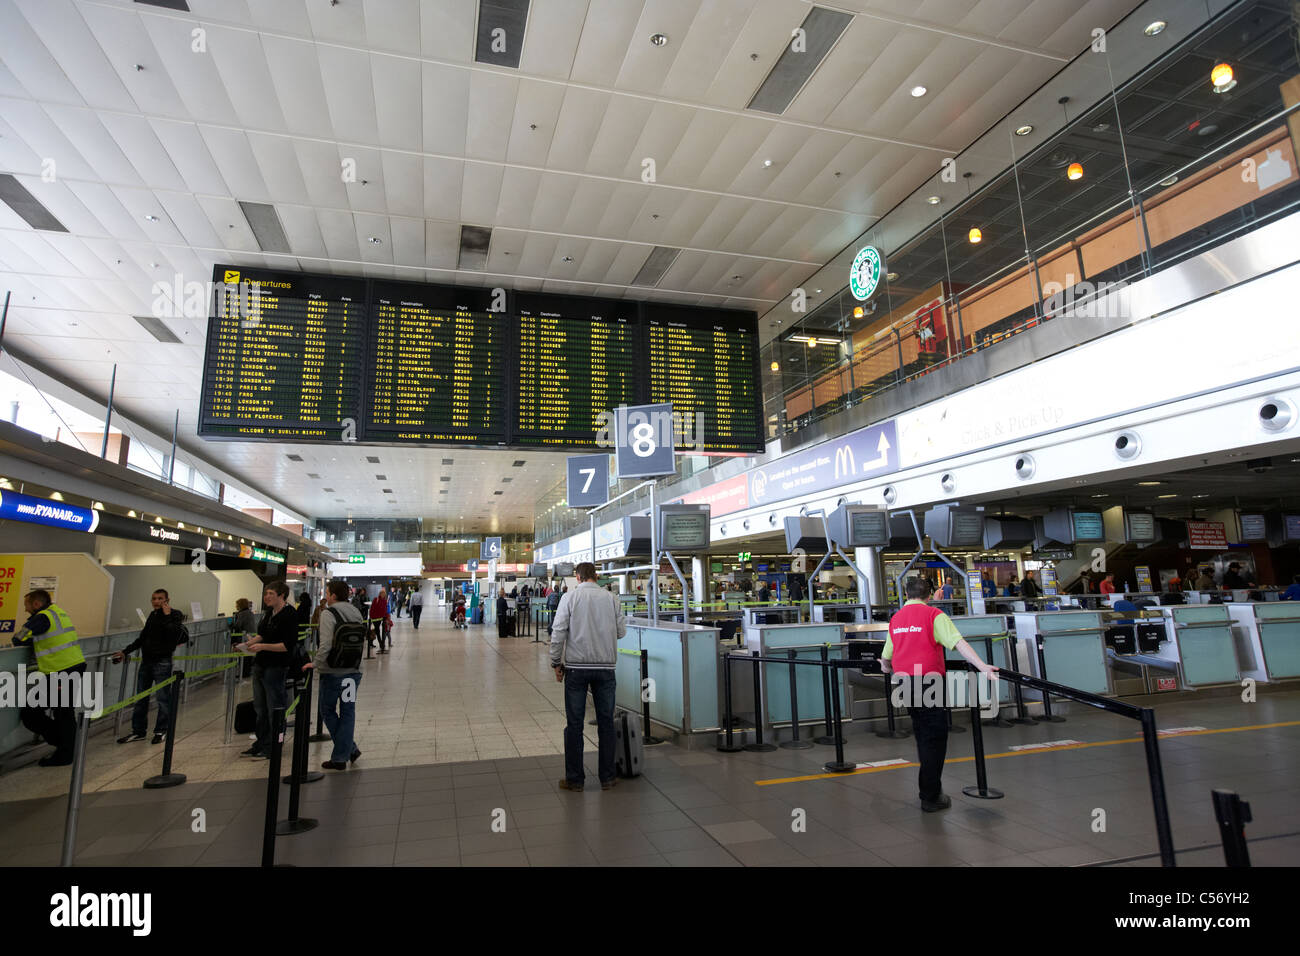 Dublin Airport saw busiest ever day on July 30